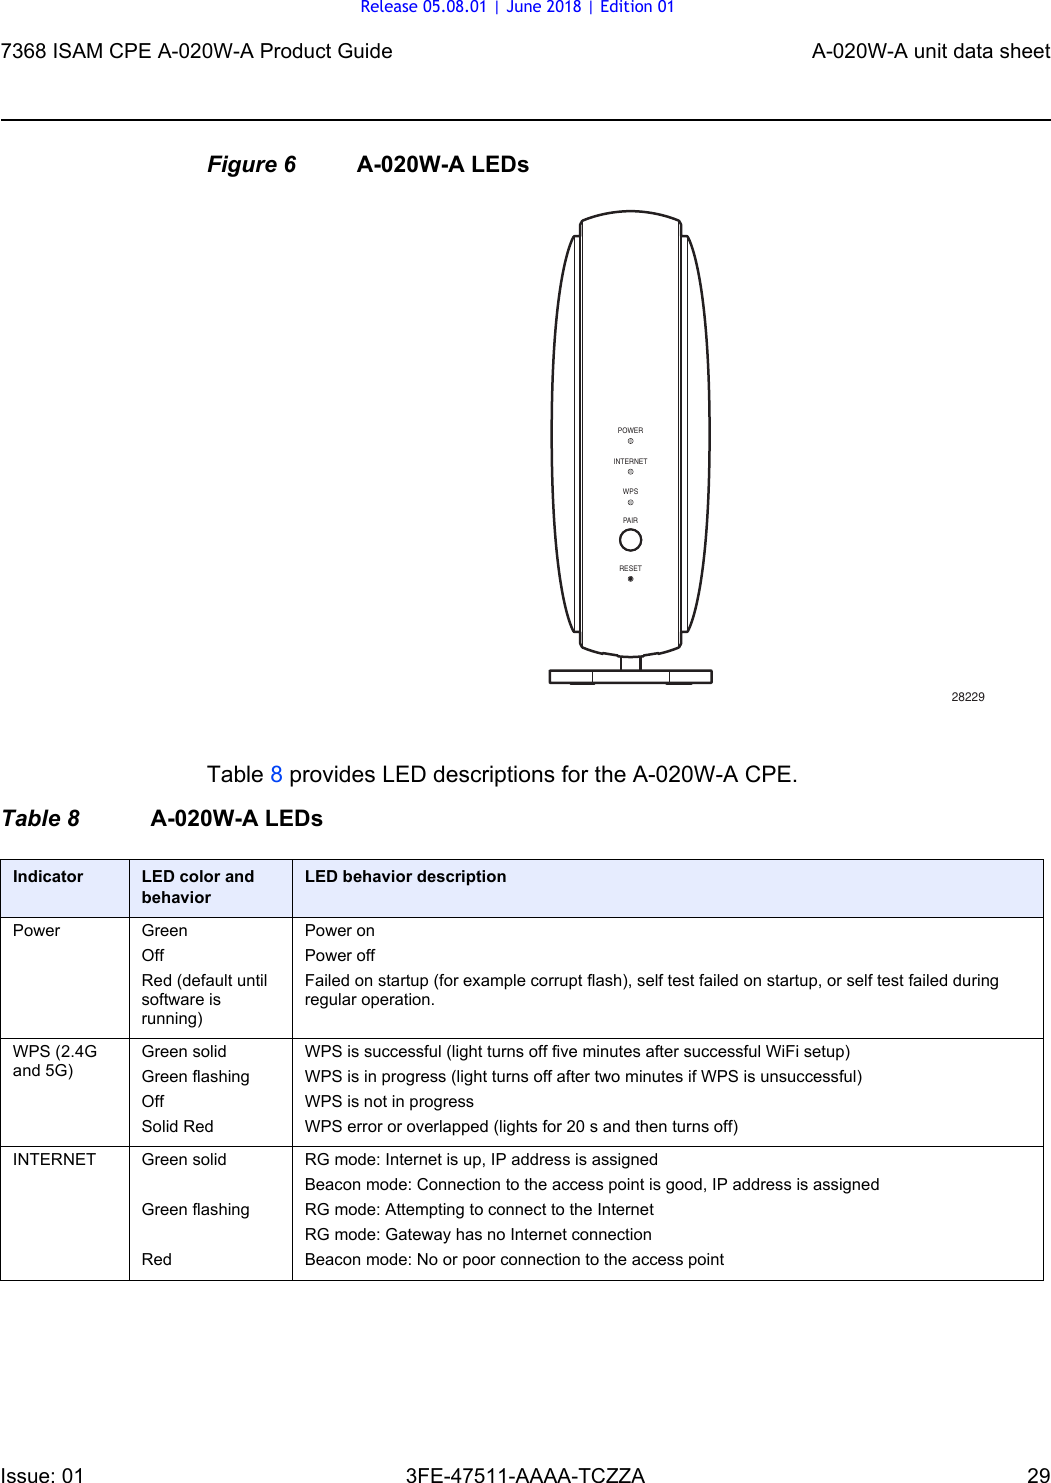 7368 ISAM CPE A-020W-A Product Guide A-020W-A unit data sheetIssue: 01 3FE-47511-AAAA-TCZZA 29 Figure 6 A-020W-A LEDsTable 8 provides LED descriptions for the A-020W-A CPE.Table 8 A-020W-A LEDsINTERNETWPSPA I RRESETPOWER28229Indicator LED color and behaviorLED behavior descriptionPower GreenOffRed (default until software is running)Power onPower offFailed on startup (for example corrupt flash), self test failed on startup, or self test failed during regular operation.WPS (2.4G and 5G)Green solidGreen flashingOffSolid RedWPS is successful (light turns off five minutes after successful WiFi setup)WPS is in progress (light turns off after two minutes if WPS is unsuccessful)WPS is not in progressWPS error or overlapped (lights for 20 s and then turns off)INTERNET Green solid Green flashingRedRG mode: Internet is up, IP address is assignedBeacon mode: Connection to the access point is good, IP address is assignedRG mode: Attempting to connect to the InternetRG mode: Gateway has no Internet connectionBeacon mode: No or poor connection to the access pointRelease 05.08.01 | June 2018 | Edition 01